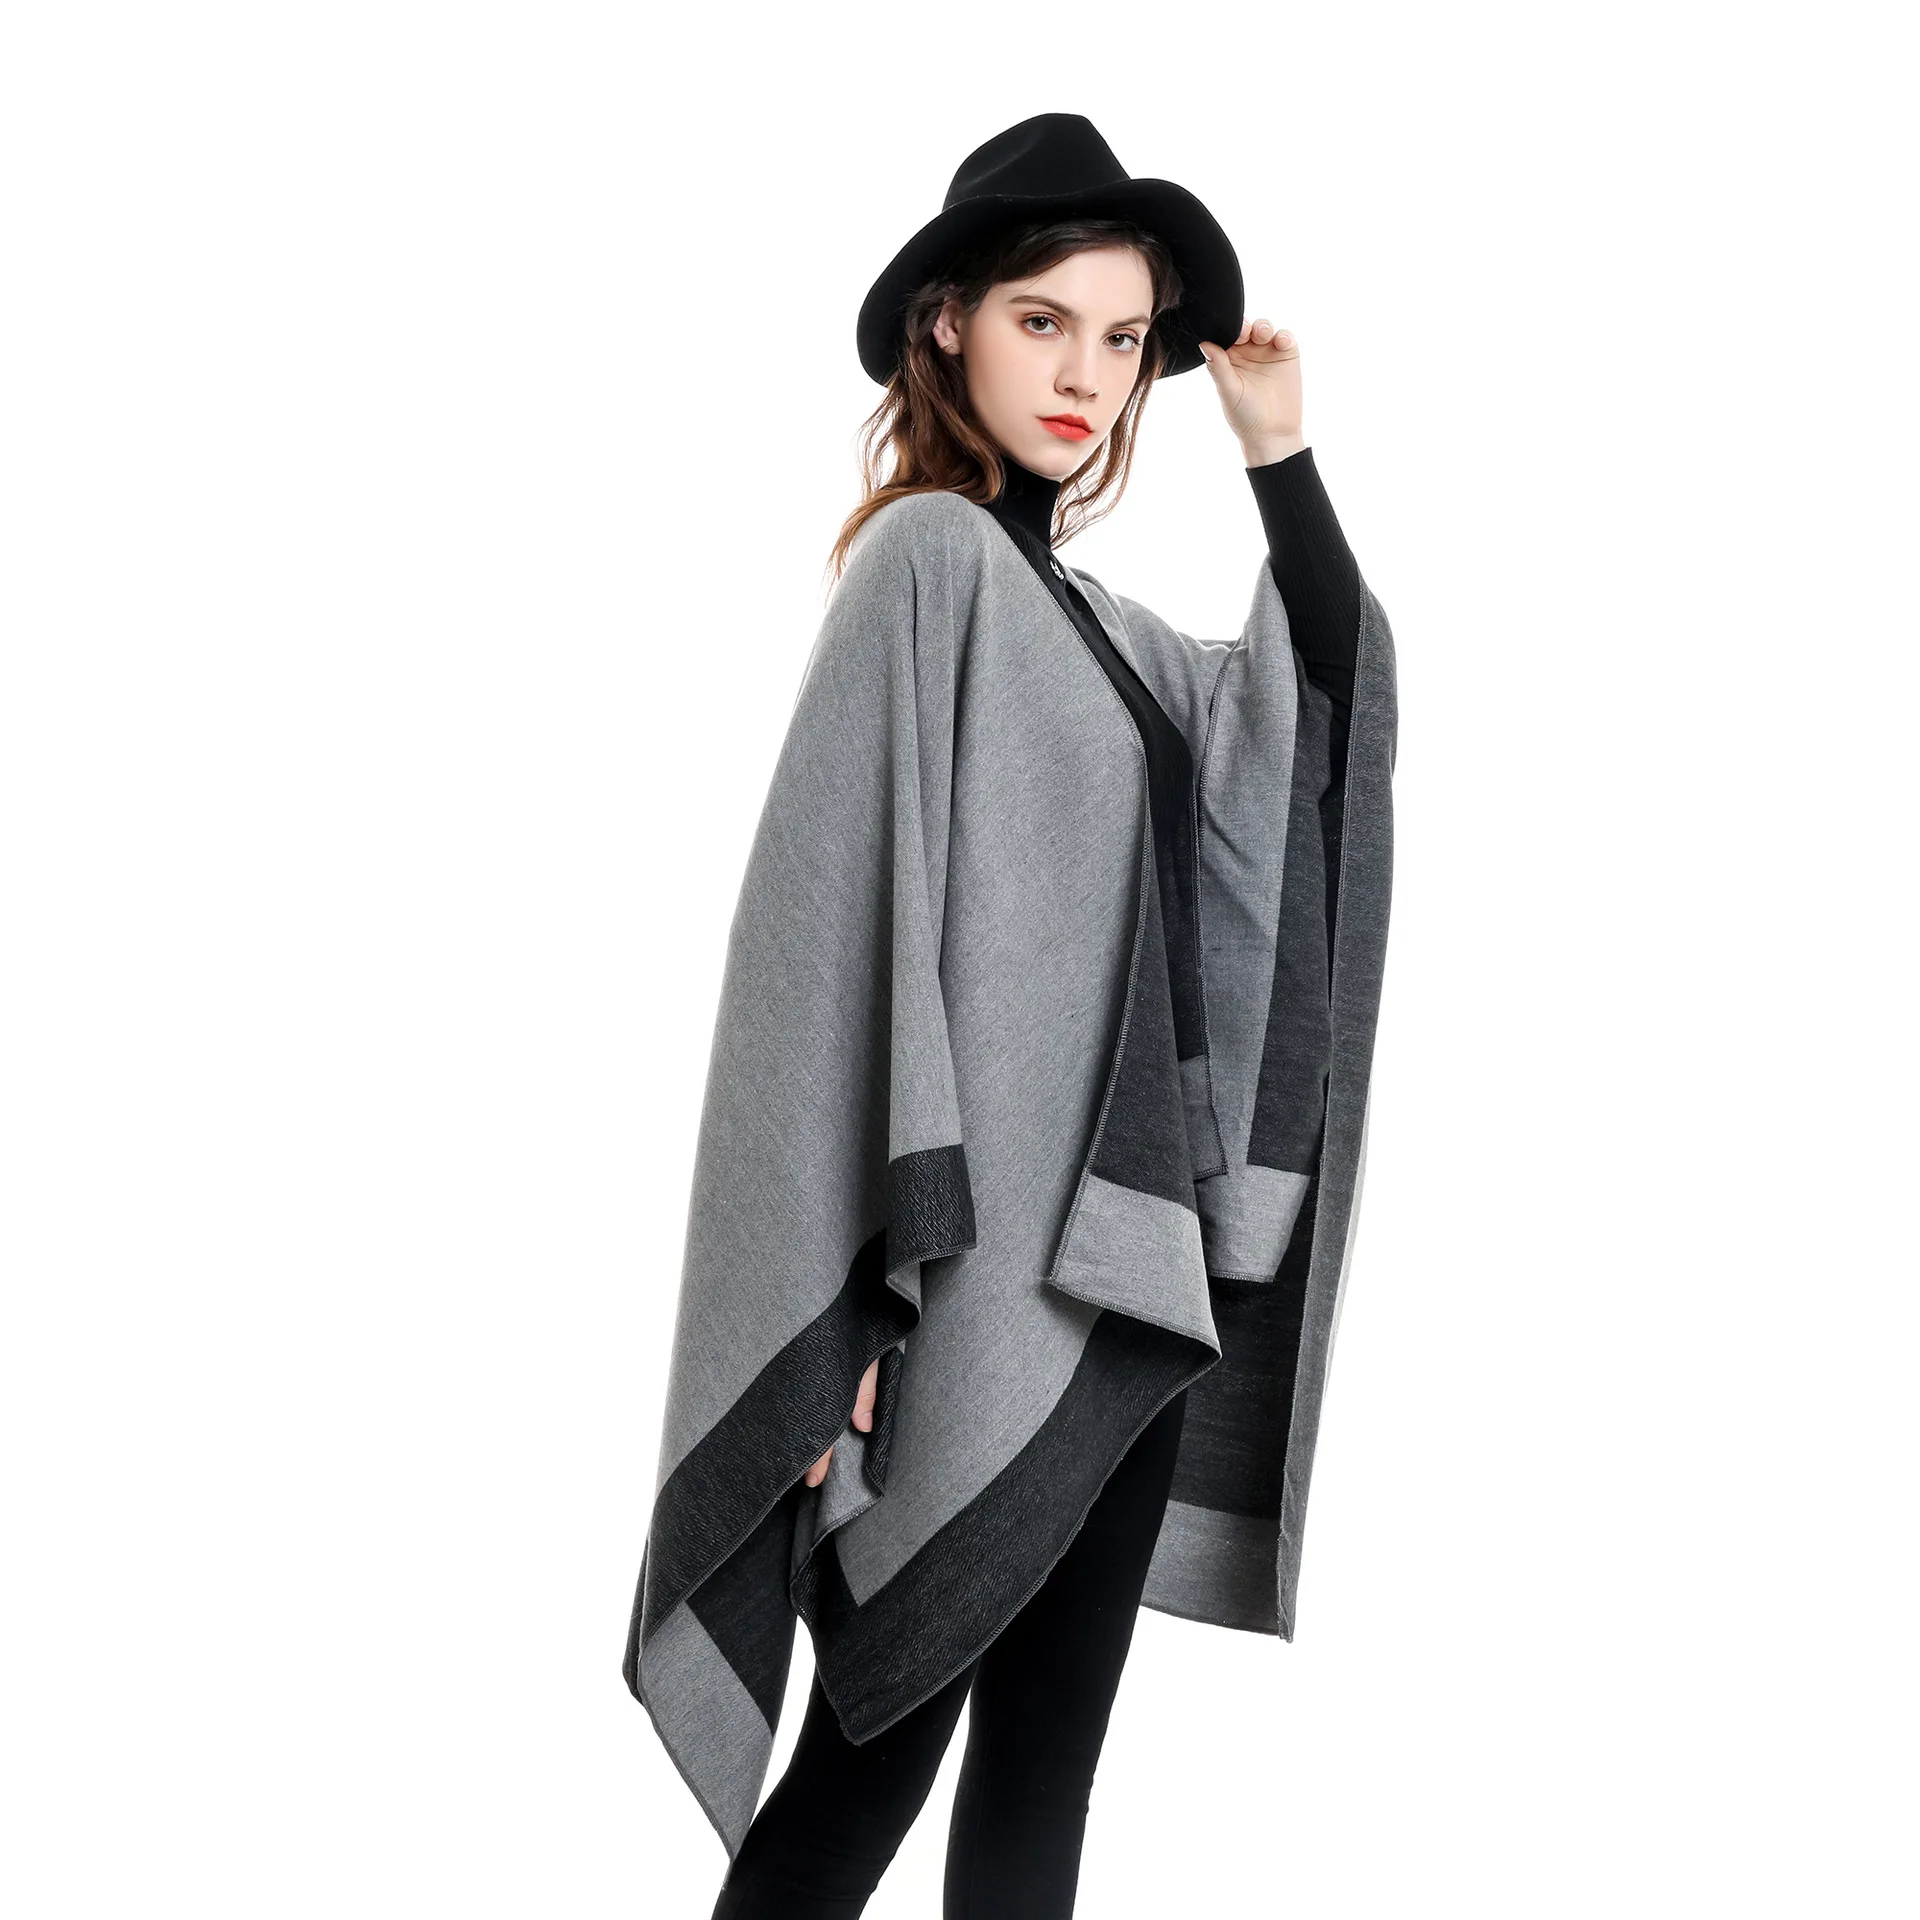 2022 Spring  Autumn Solid Color European  American Travel Shopping New Women's Warm Big Shawl Sunscreen Gray Cloak Scarf chenkio scarfs for women solid color blanket warm silky cashmere feel triangle wrap shawl square scarf women scarf women luxury